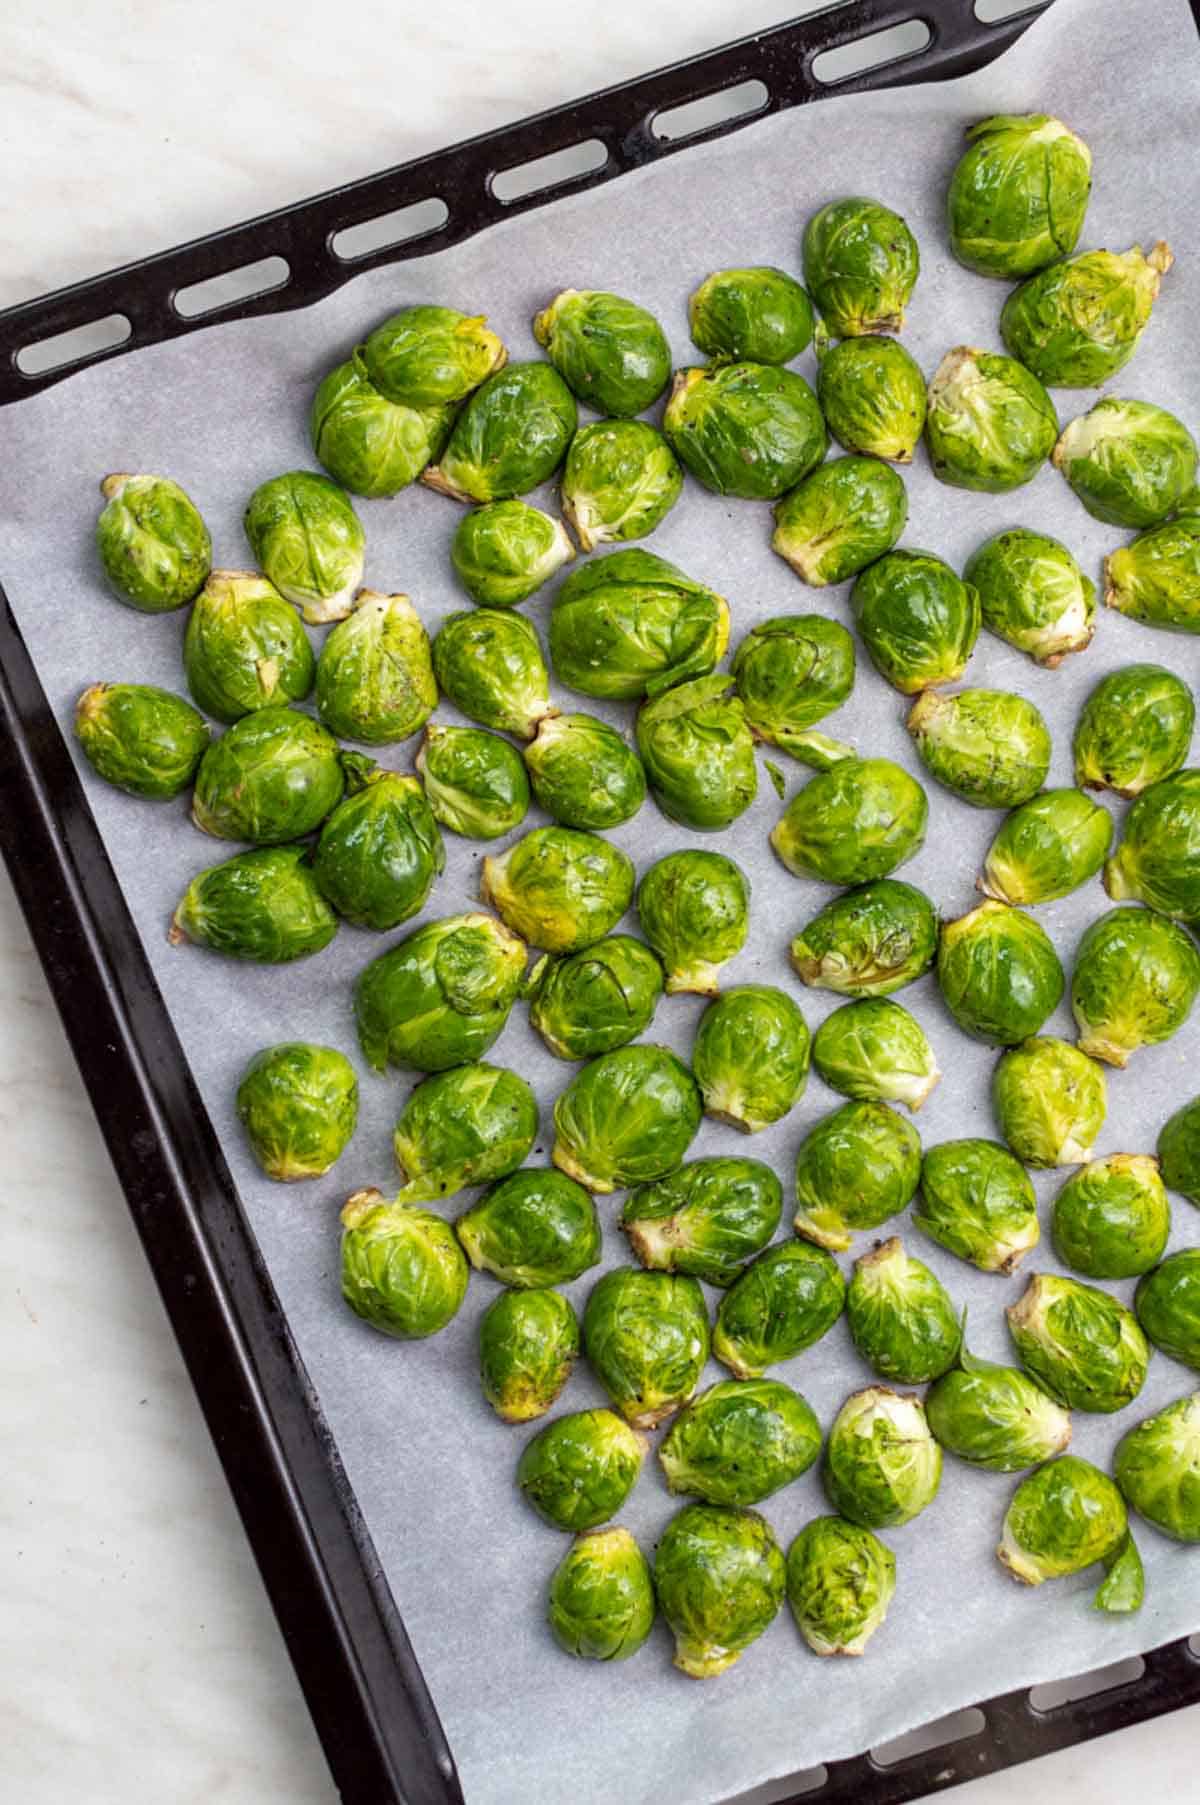 Halved frozen Brussels sprouts on a baking sheet.